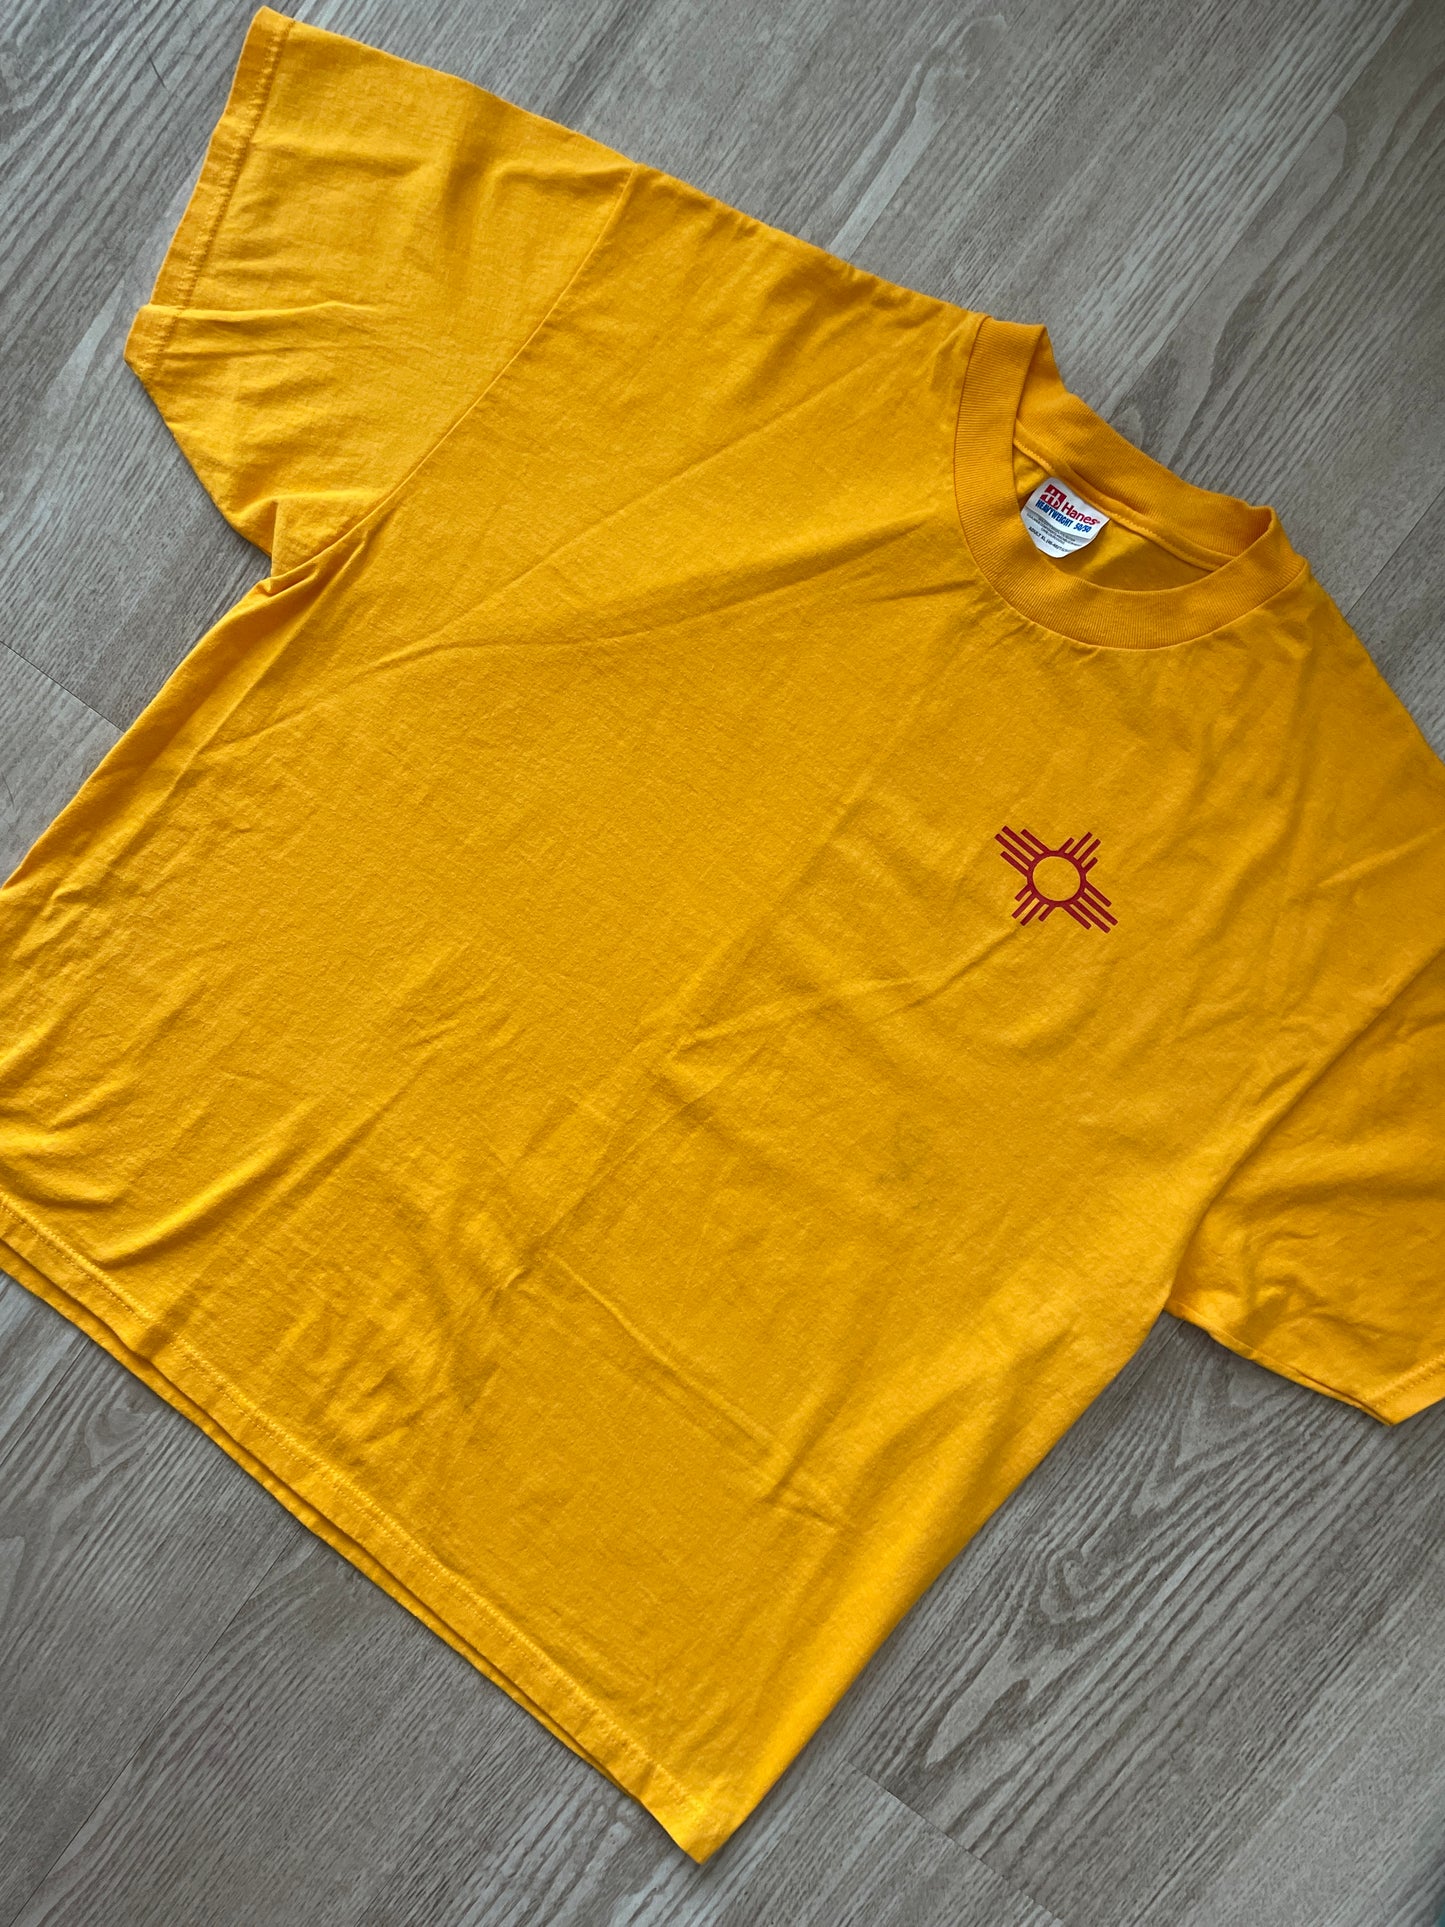 Medium Men's Yellow and Red New Mexico Zia Symbol Short Sleeve T-Shirt | READY TO TIE DYE